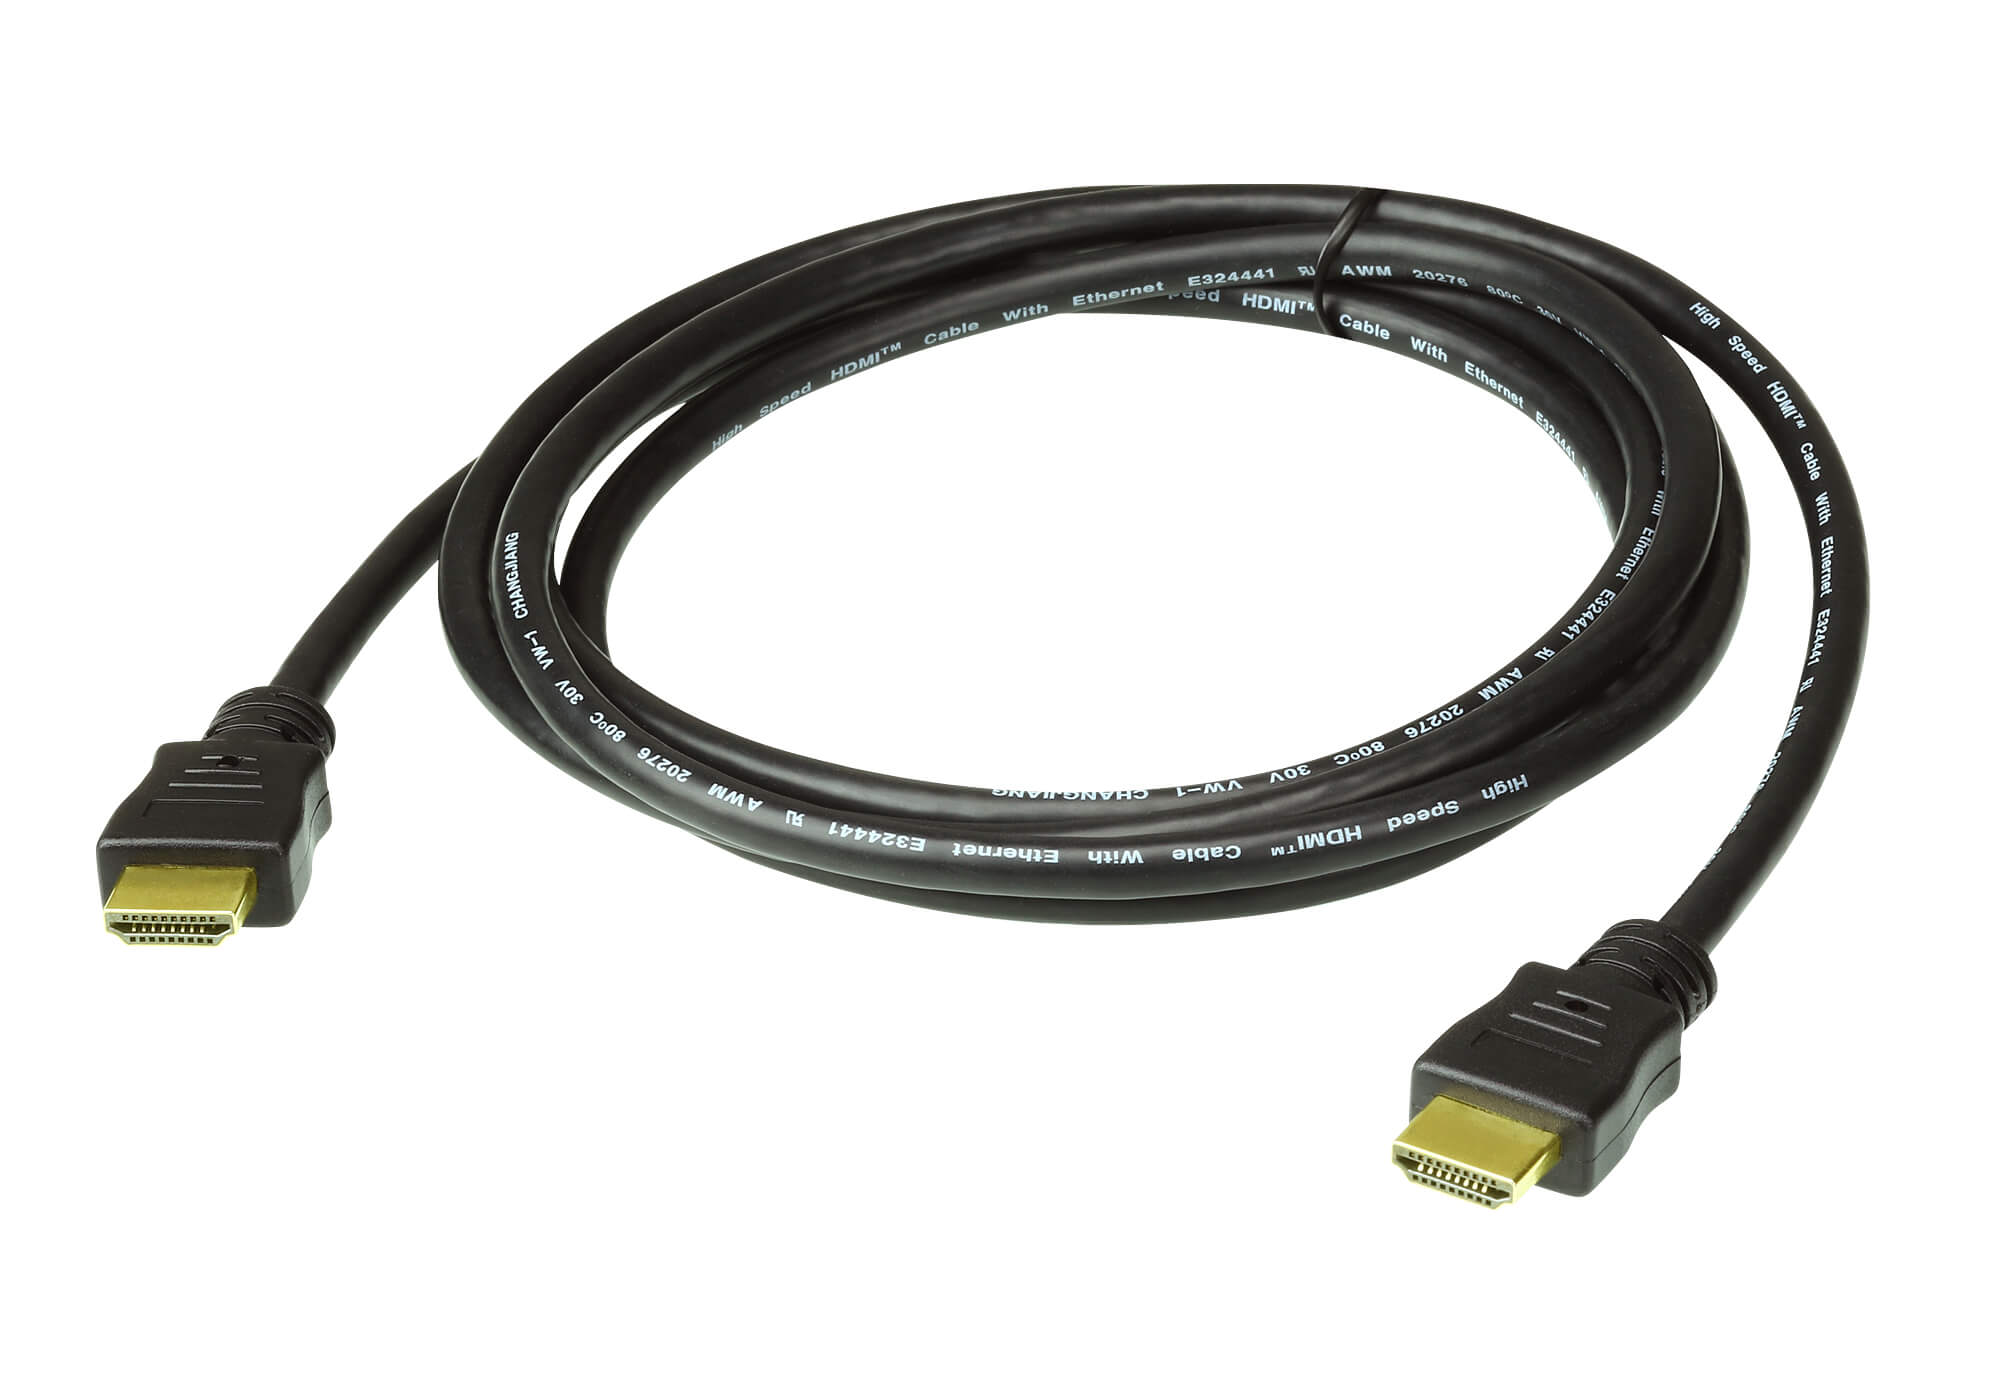 Aten 3M High Speed HDMI Cable with Ethernet. Support 4K UHD DCI, up to 4096 x 2160 @ 60Hz